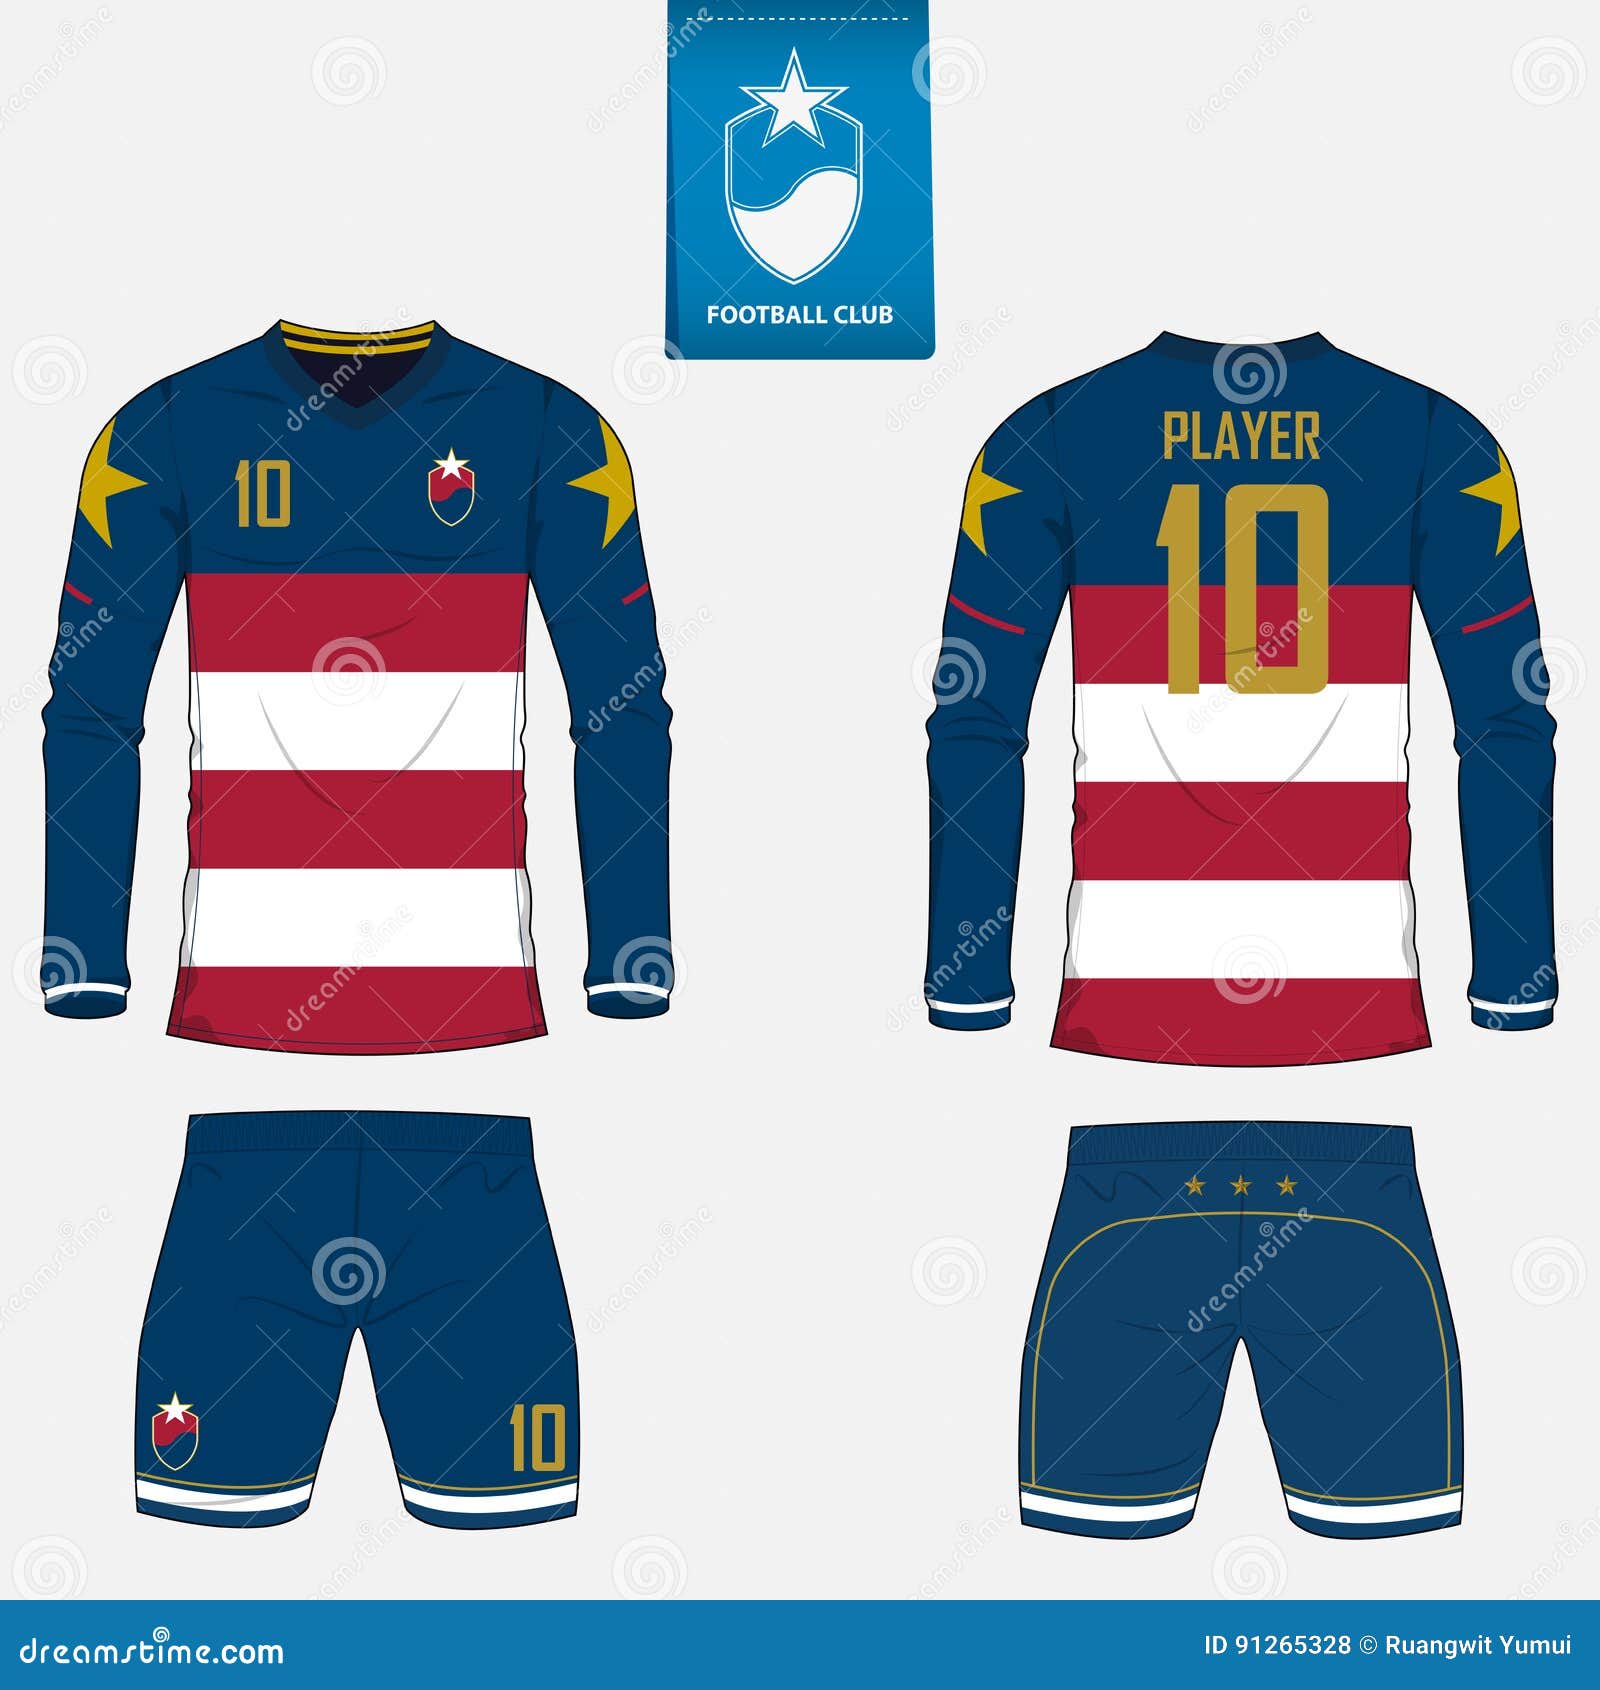 Download Set Of Soccer Kit Or Football Jersey Template For Football ...